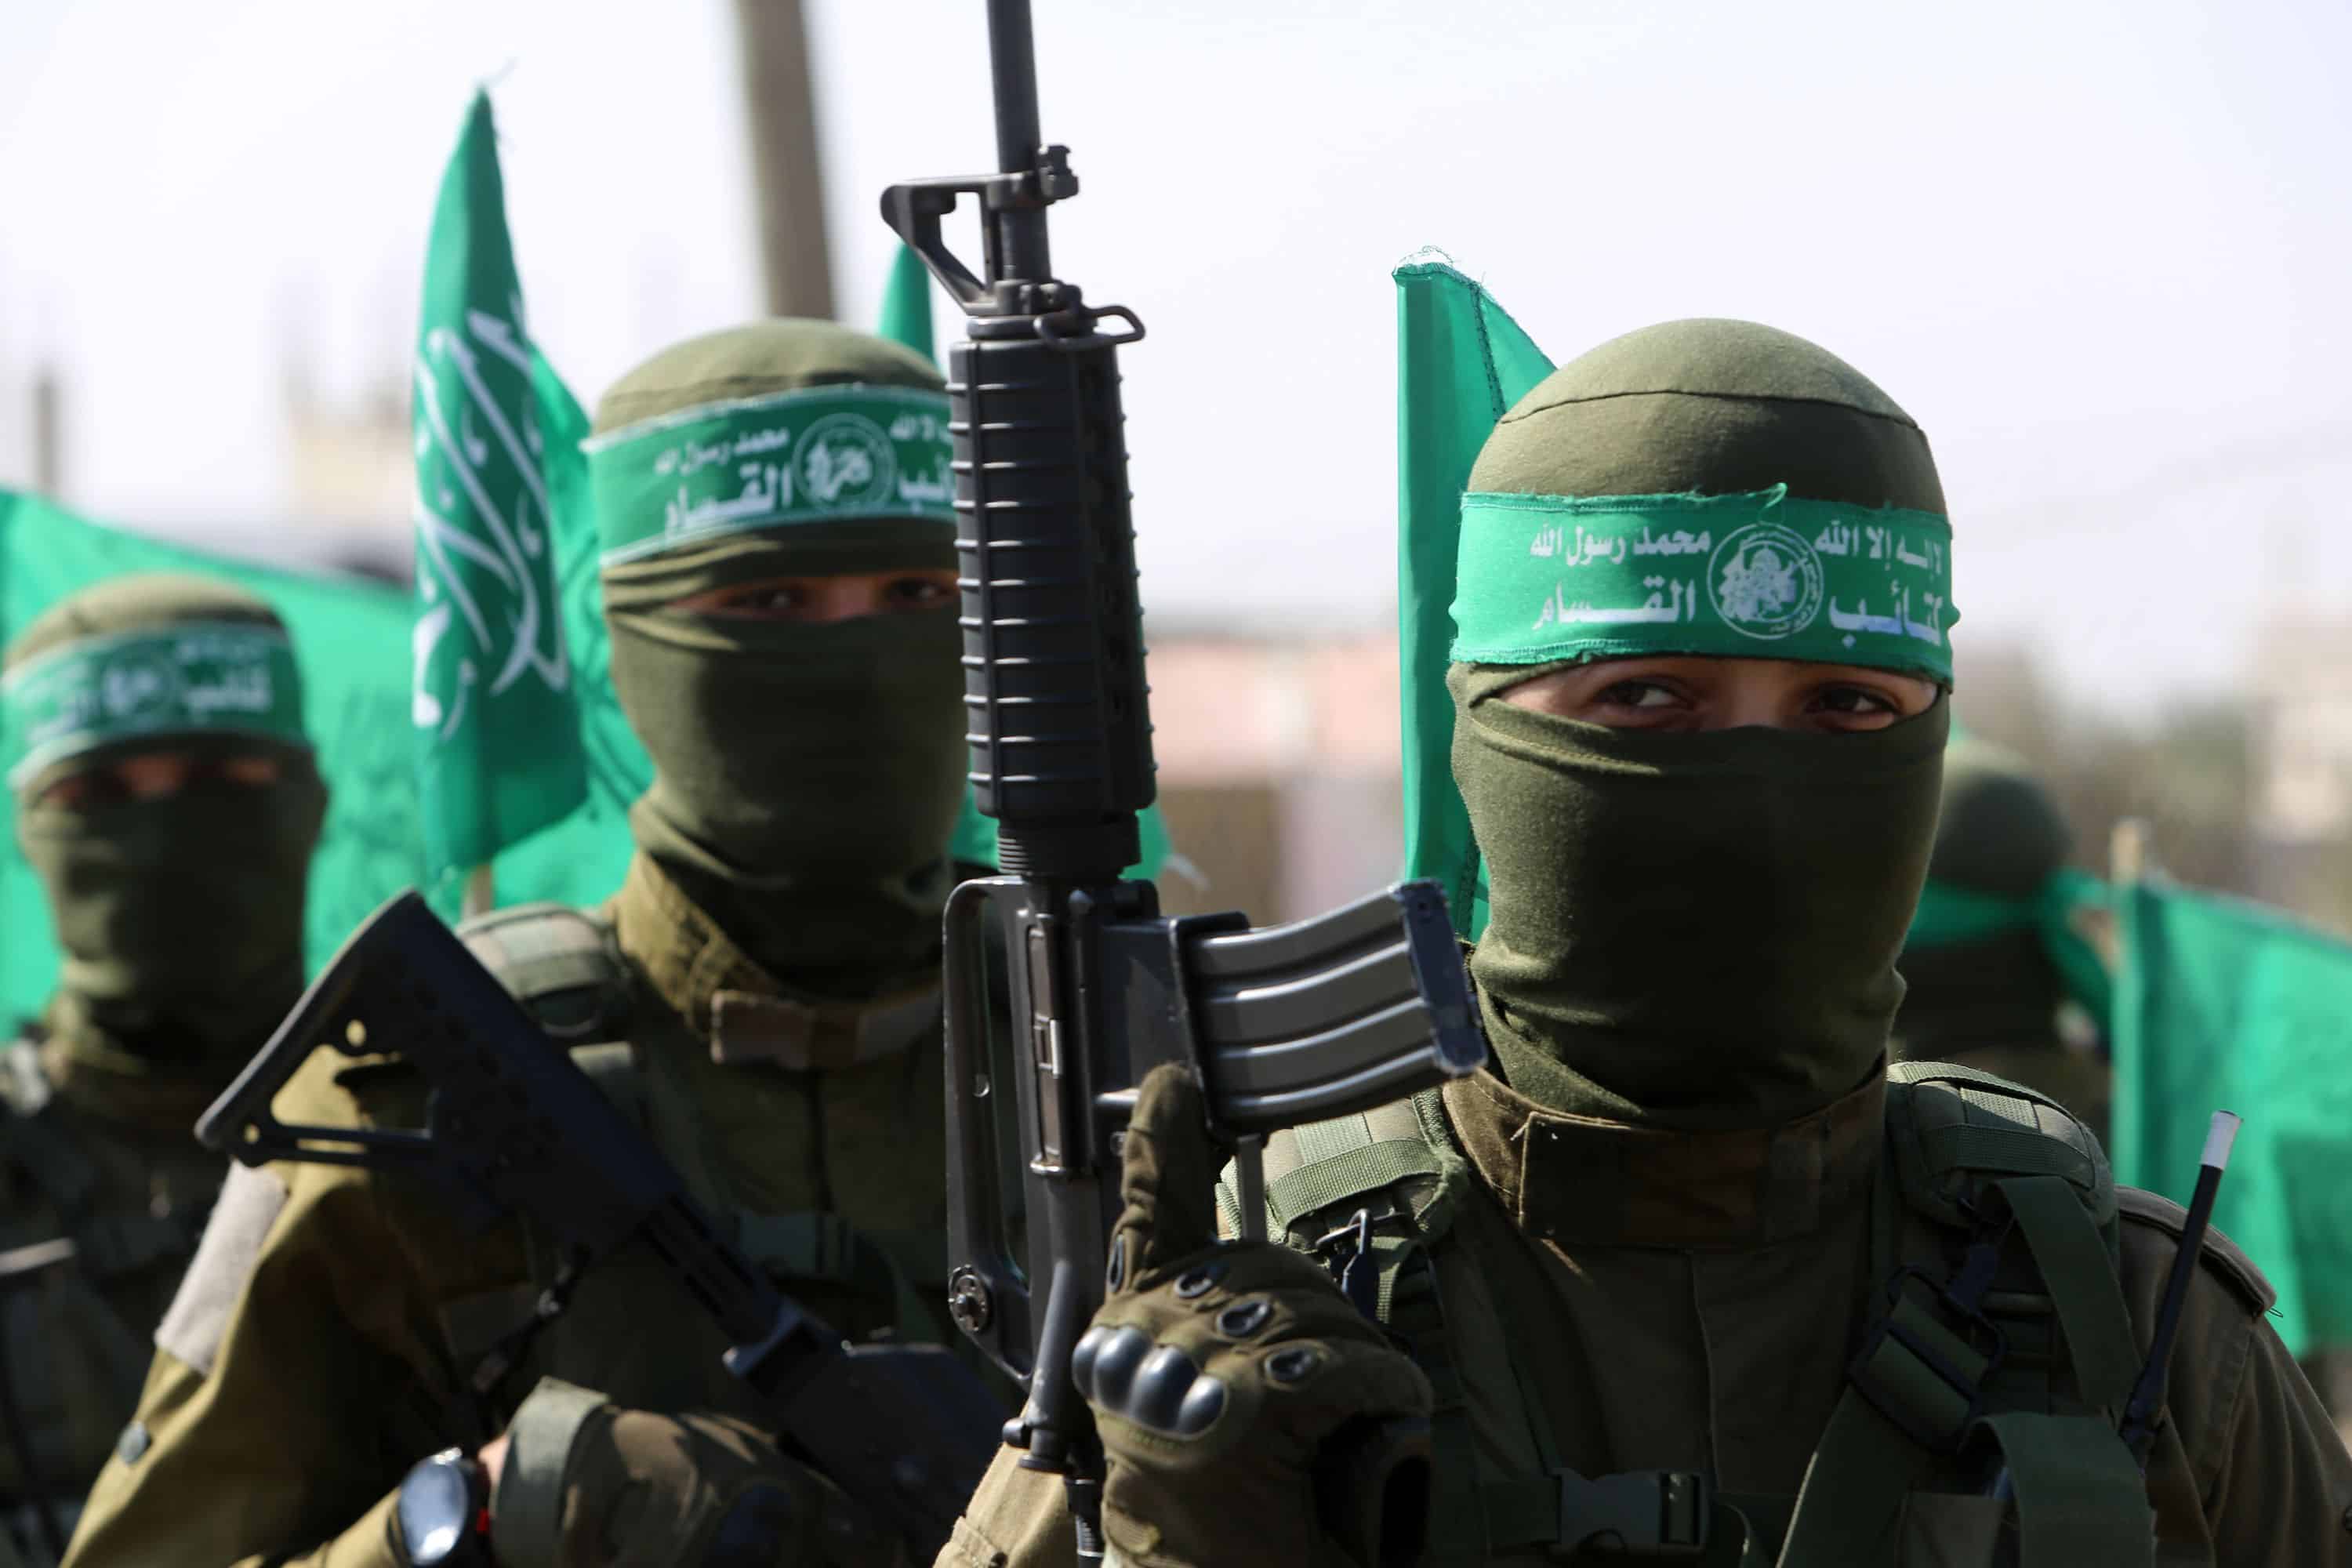 Palestinian Hamas militants take part in an anti-Israel military show in the southern Gaza Strip, on November 11, 2019. Photo by Abed Rahim Khatib